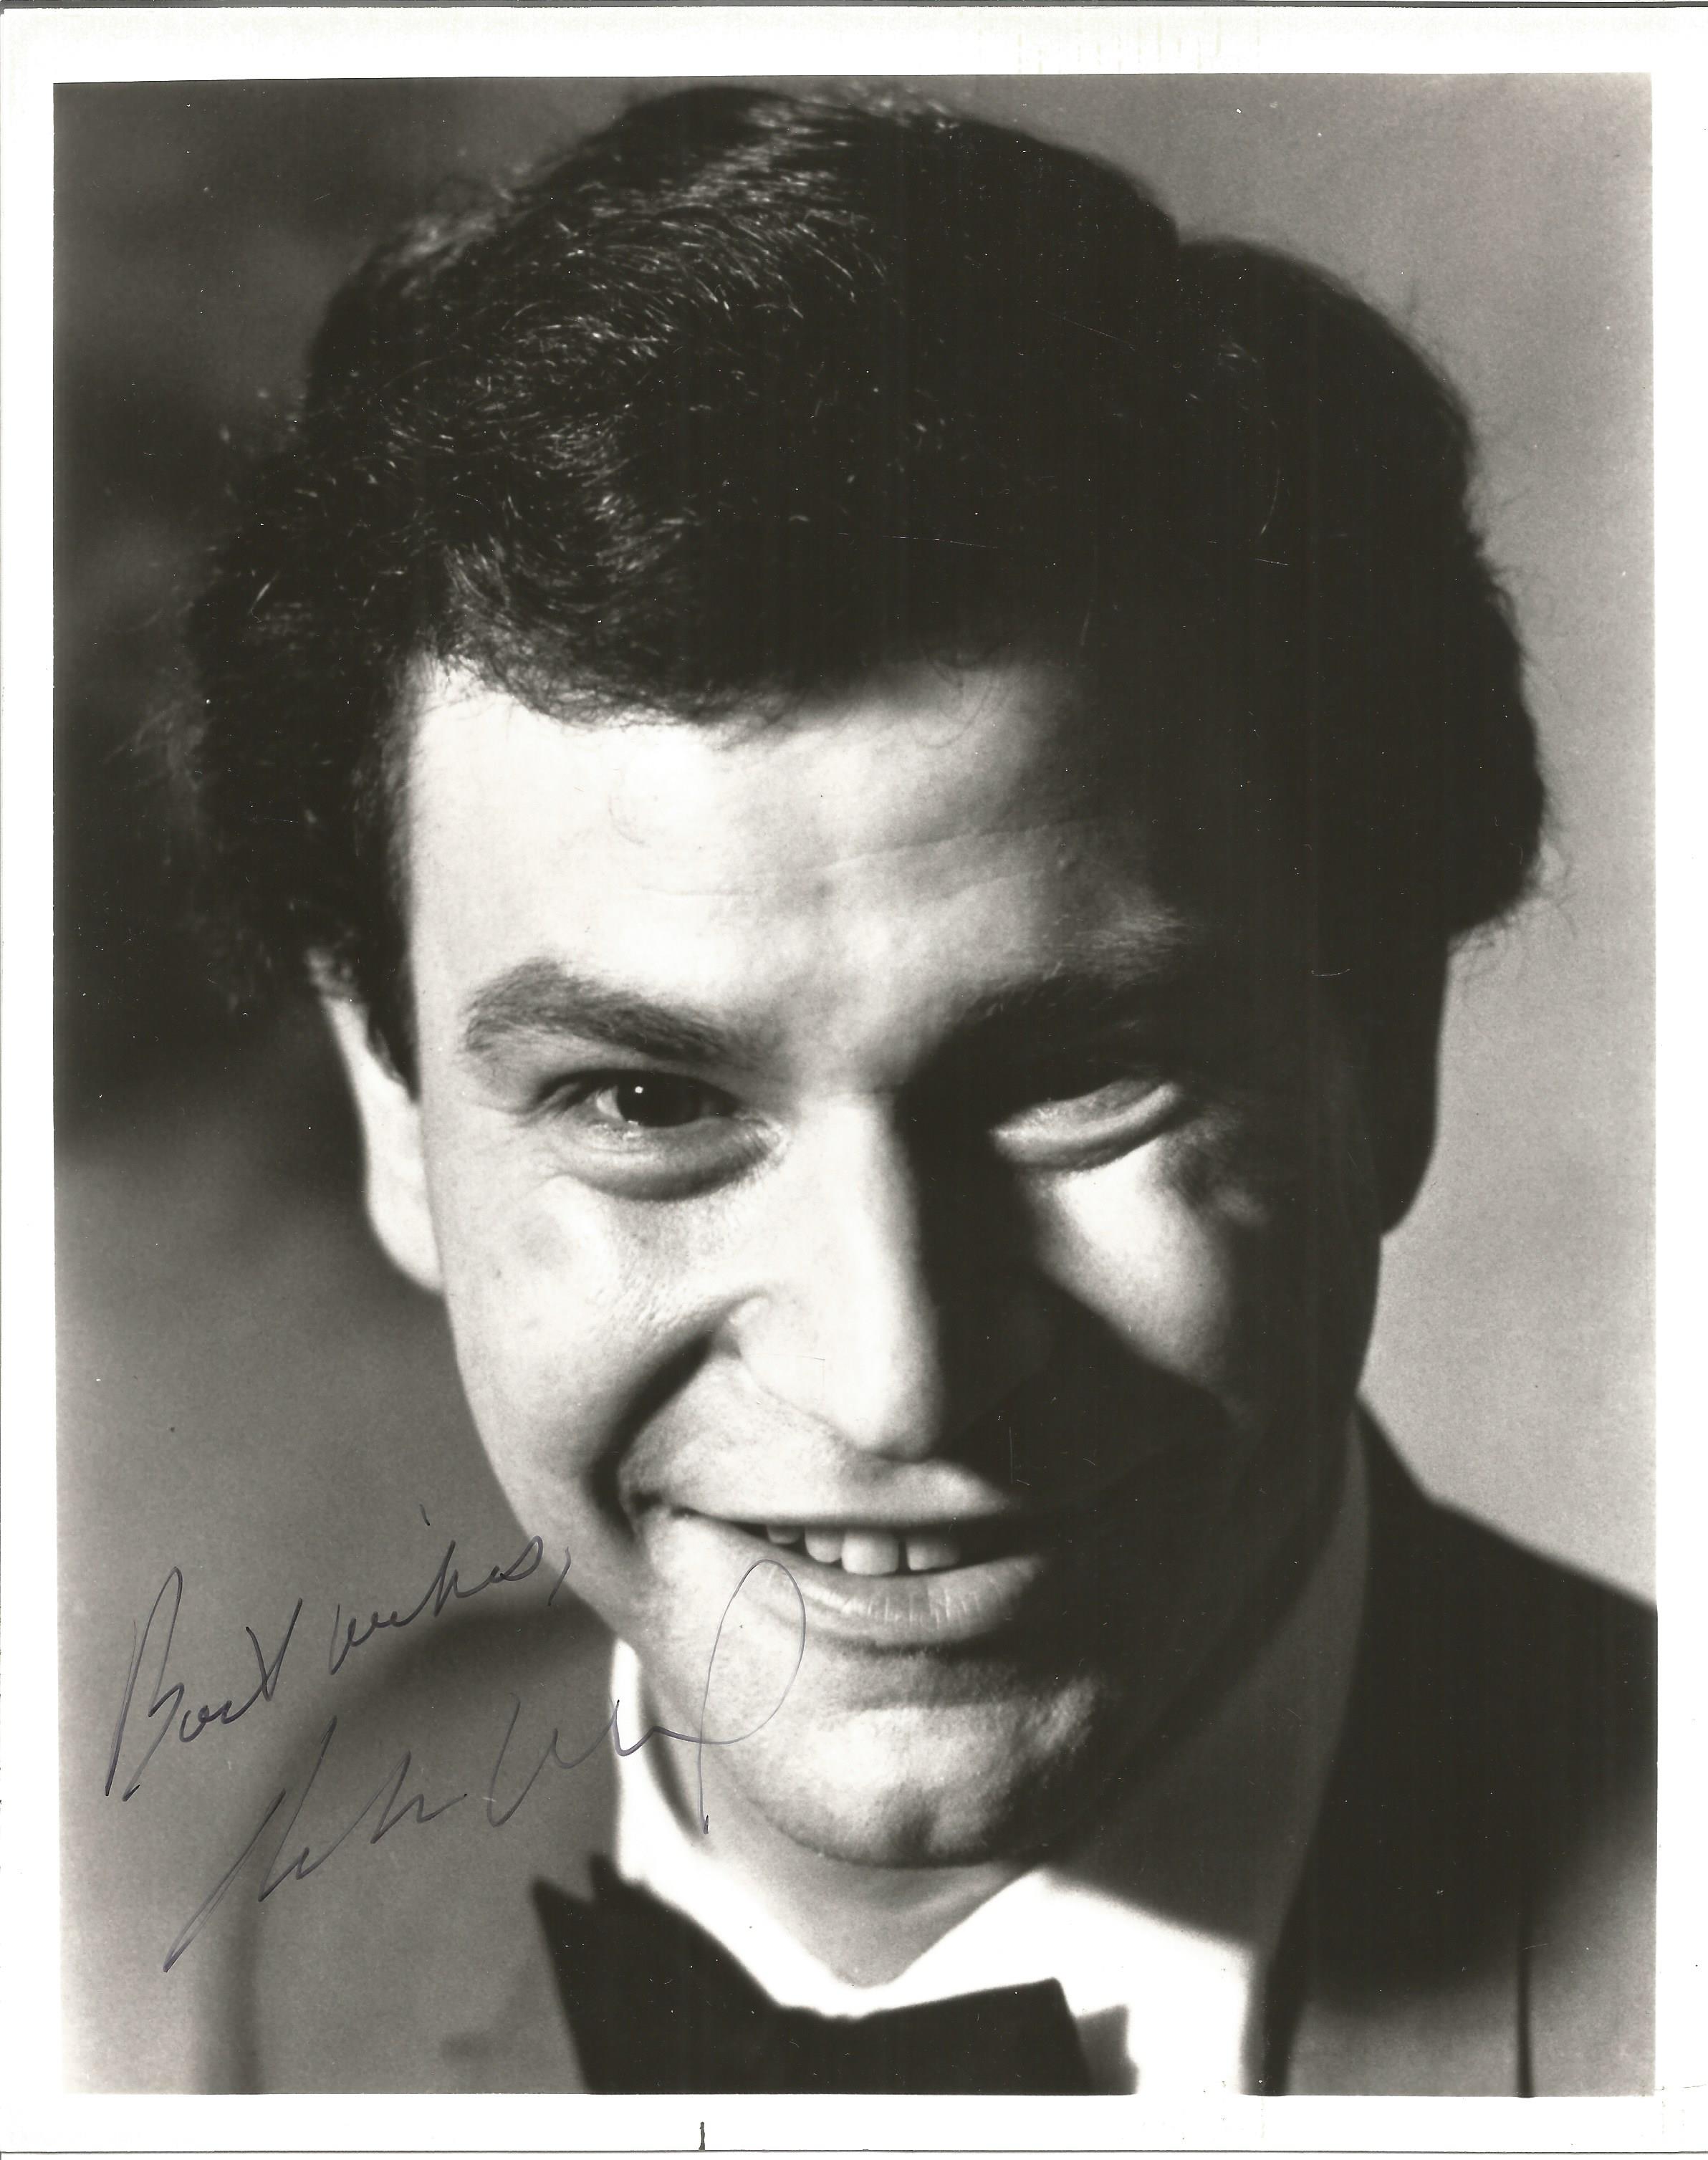 David Keith American Actor Signed 10x8 B/W Photo. Good condition. All autographs come with a